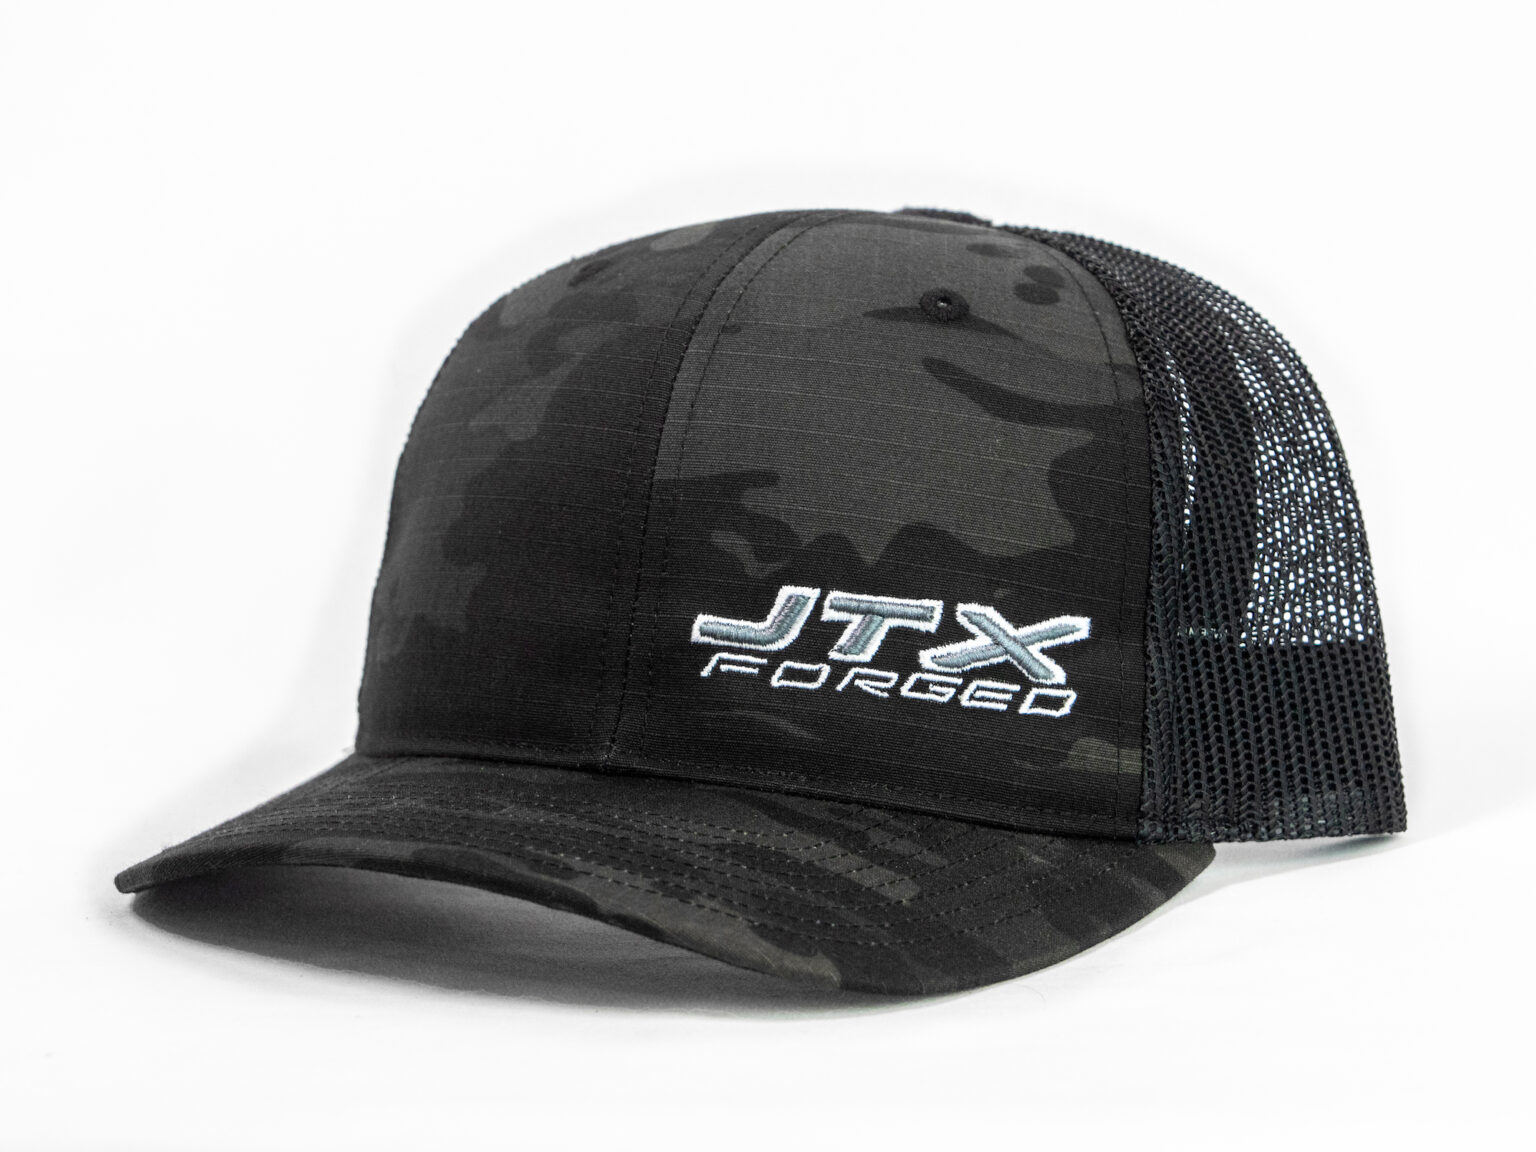 JTX Forged Merch Launch! - JTX Forged